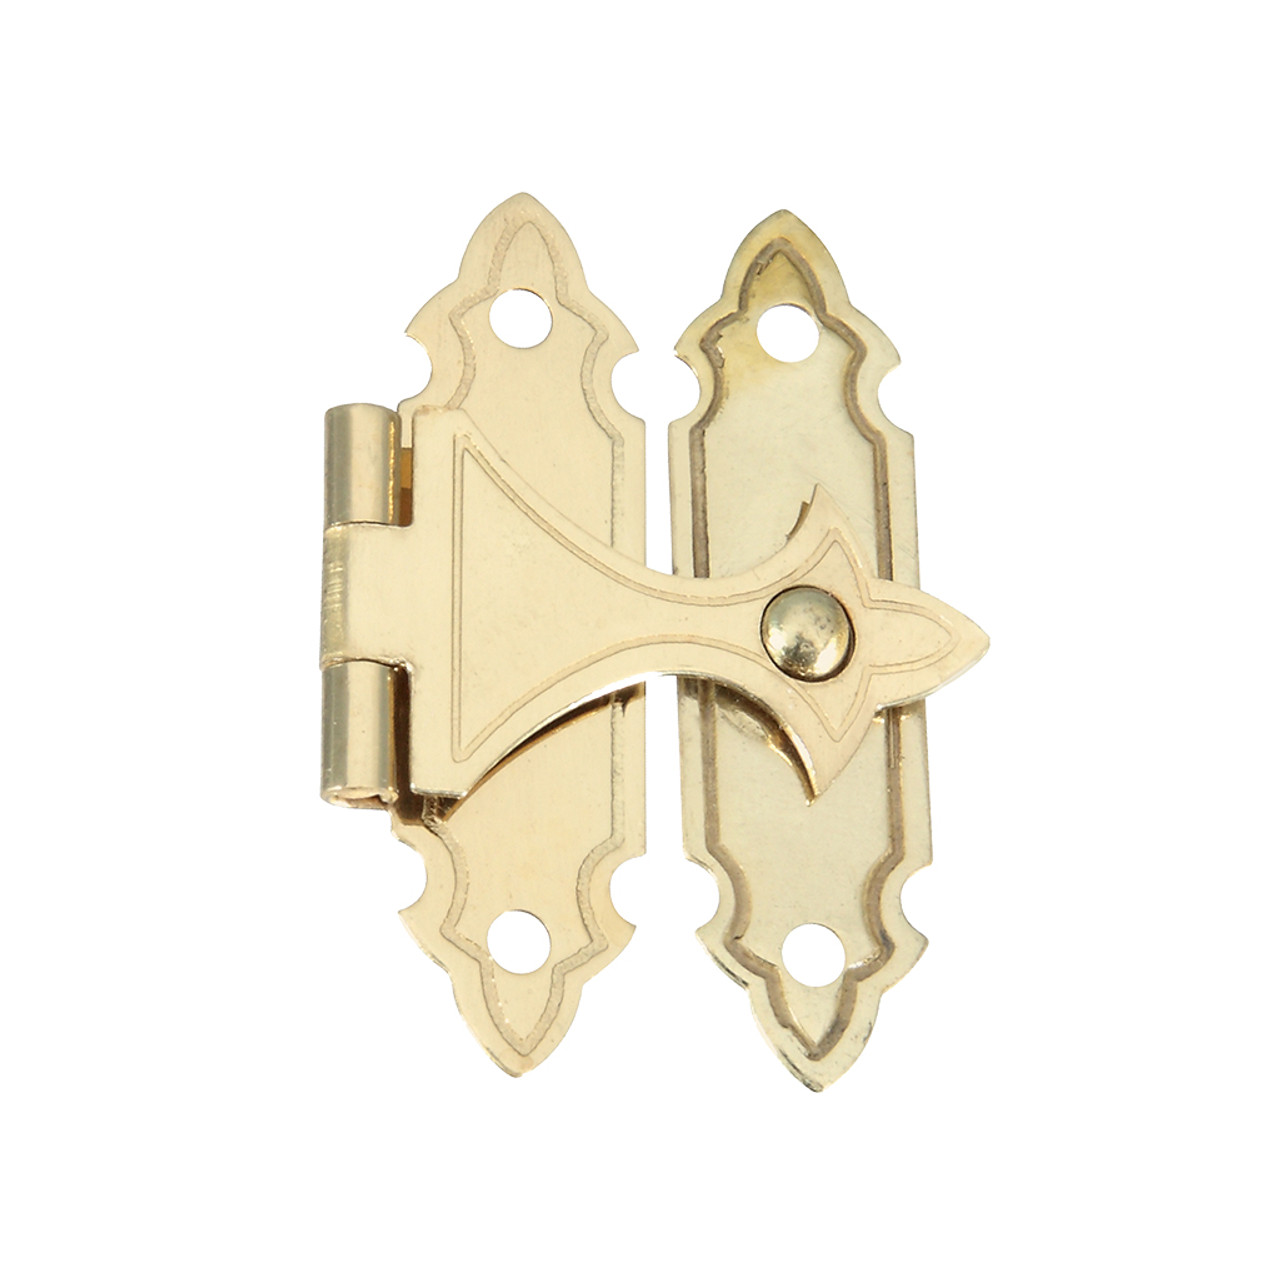 National Decorative Hinges, Solid Brass, 5/8 x 1-7/8